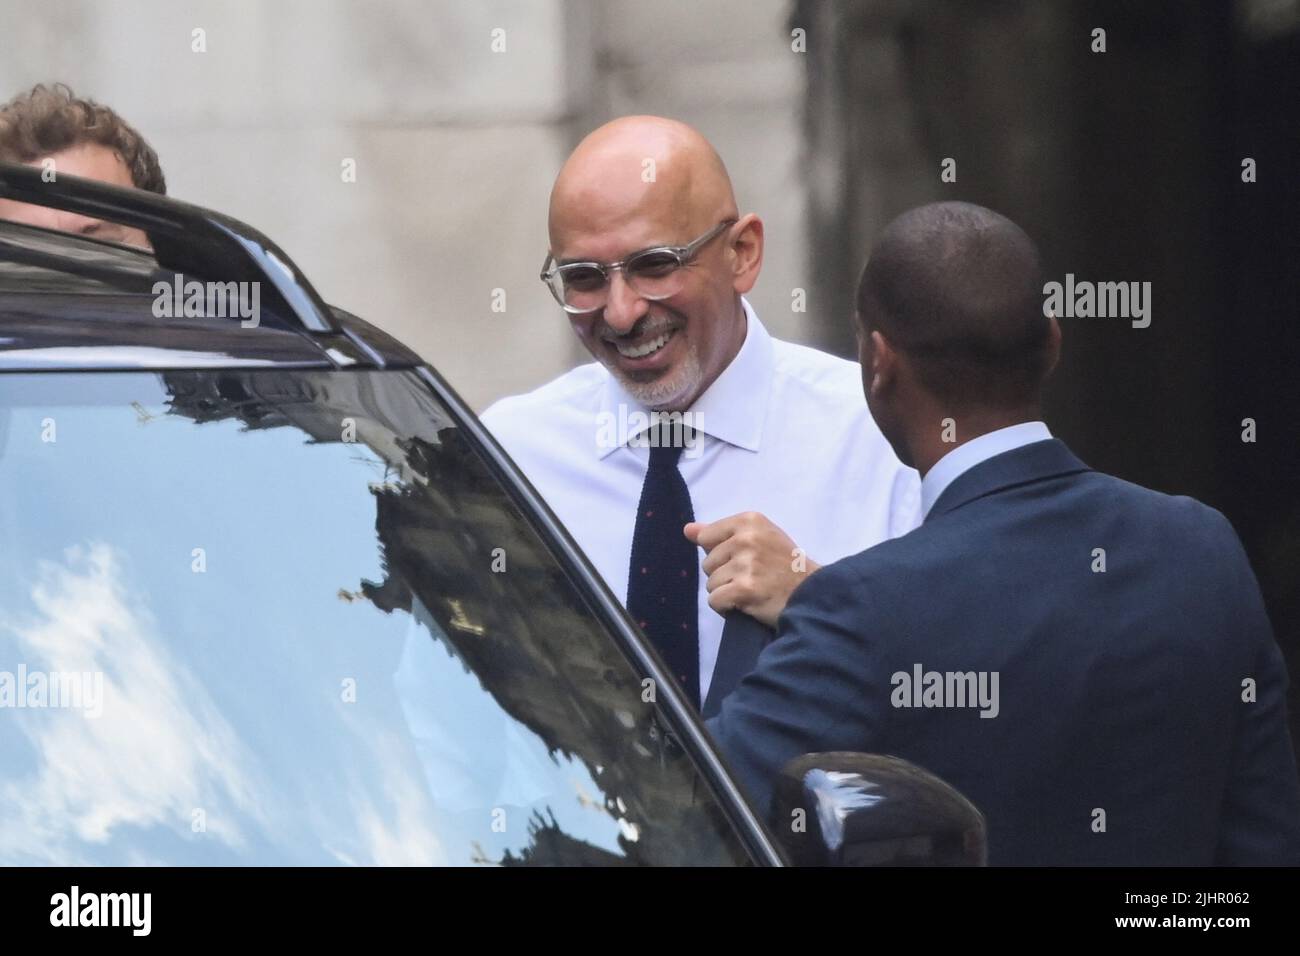 British Chancellor of the Exchequer Nadhim Zahawi enters a car between buildings in the houses of Parliament, in London, Britain, July 20, 2022. REUTERS/Toby Melville Stock Photo